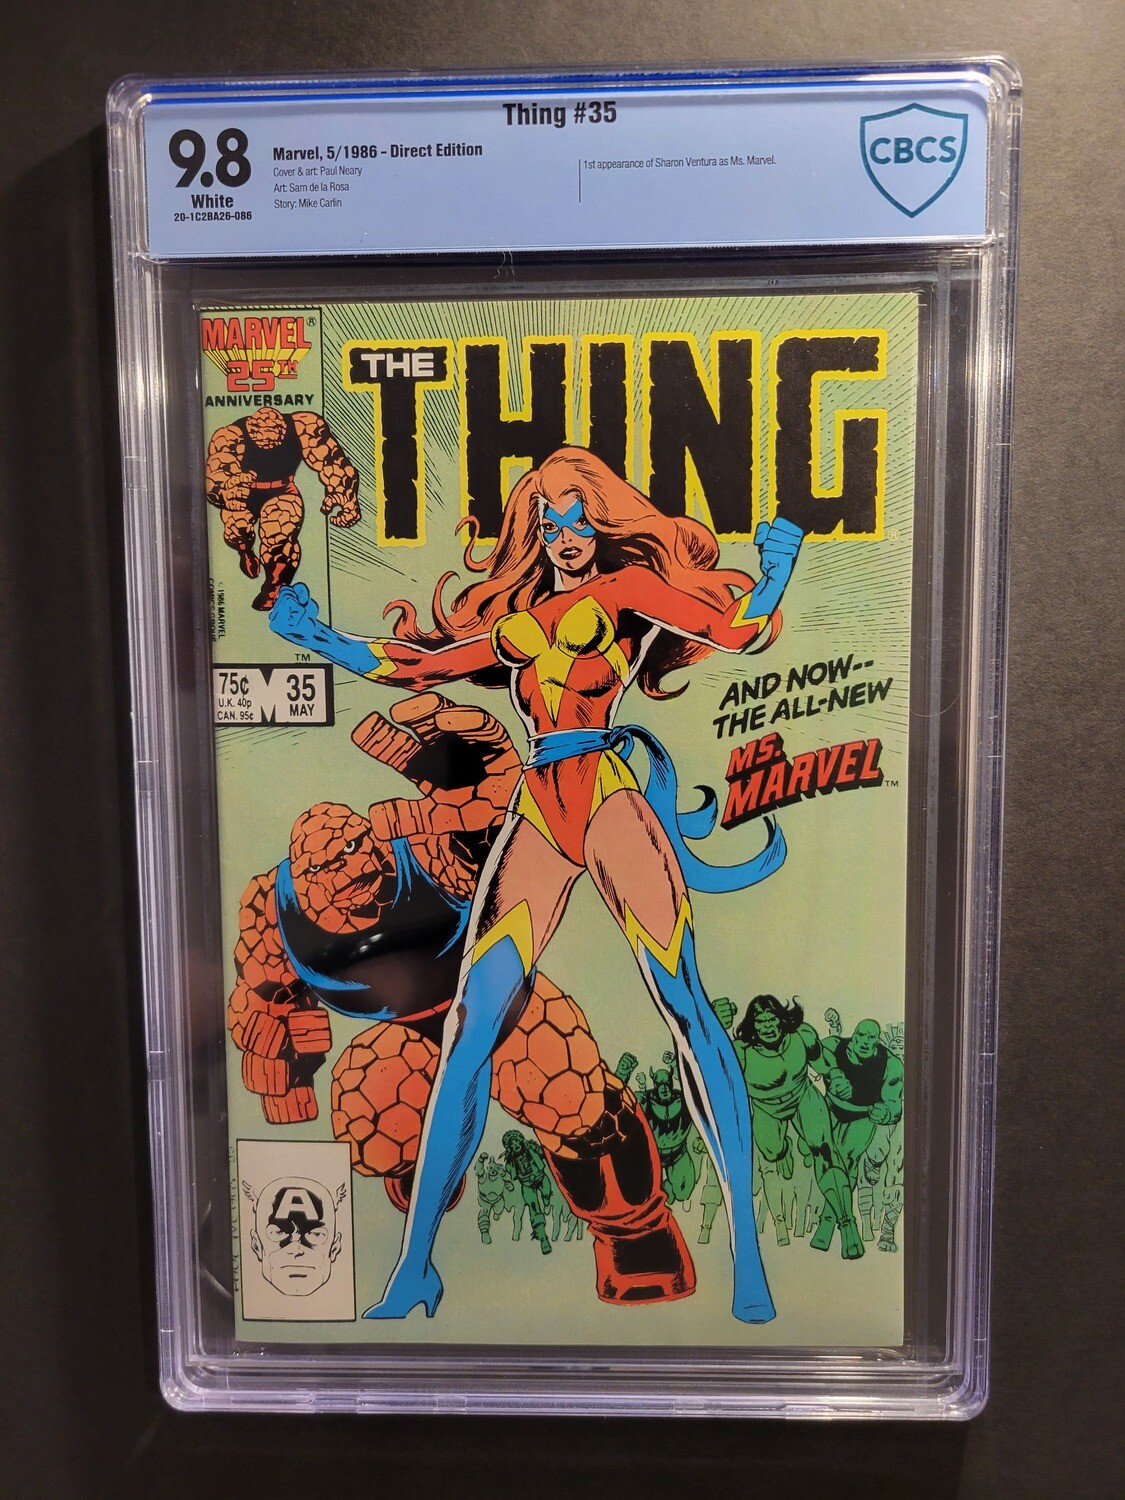 Thing #35 CBCS 9.8 1st appearance of Sharon Ventura as Ms. Marvel II